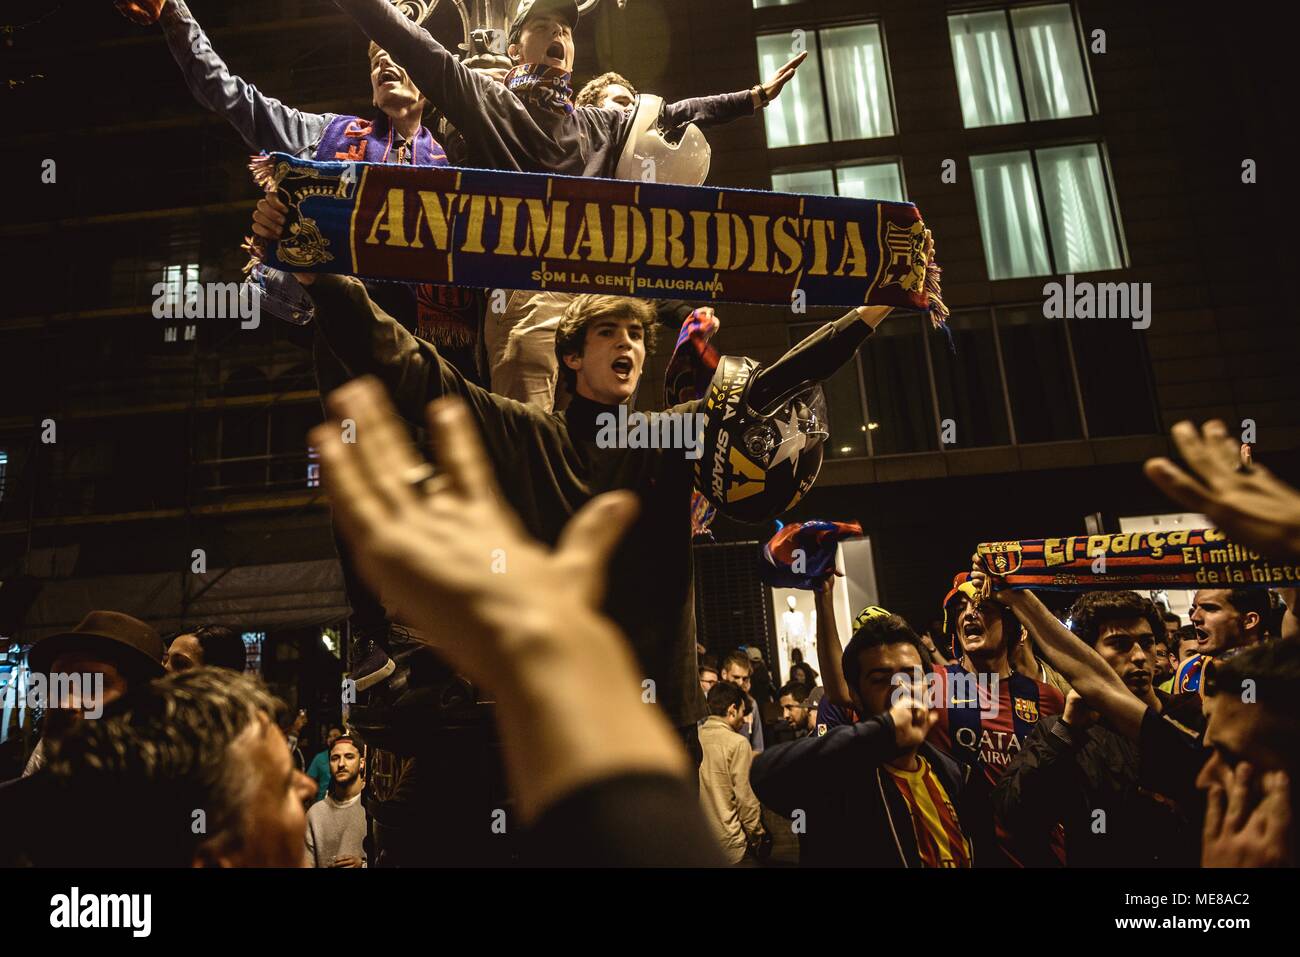 Barcelona, Spain. 21st April, 2018:  Fans of the FC Barcelona chant slogans at the Canaletes fountain in the Ramblas, the traditional spot to celebrate their trophies, as they celebrate the club's 30th 'Copa del Rey' title, the 4th in row, after beating Sevilla 5:0 in the Final. Credit: Matthias Oesterle/Alamy Live News Stock Photo